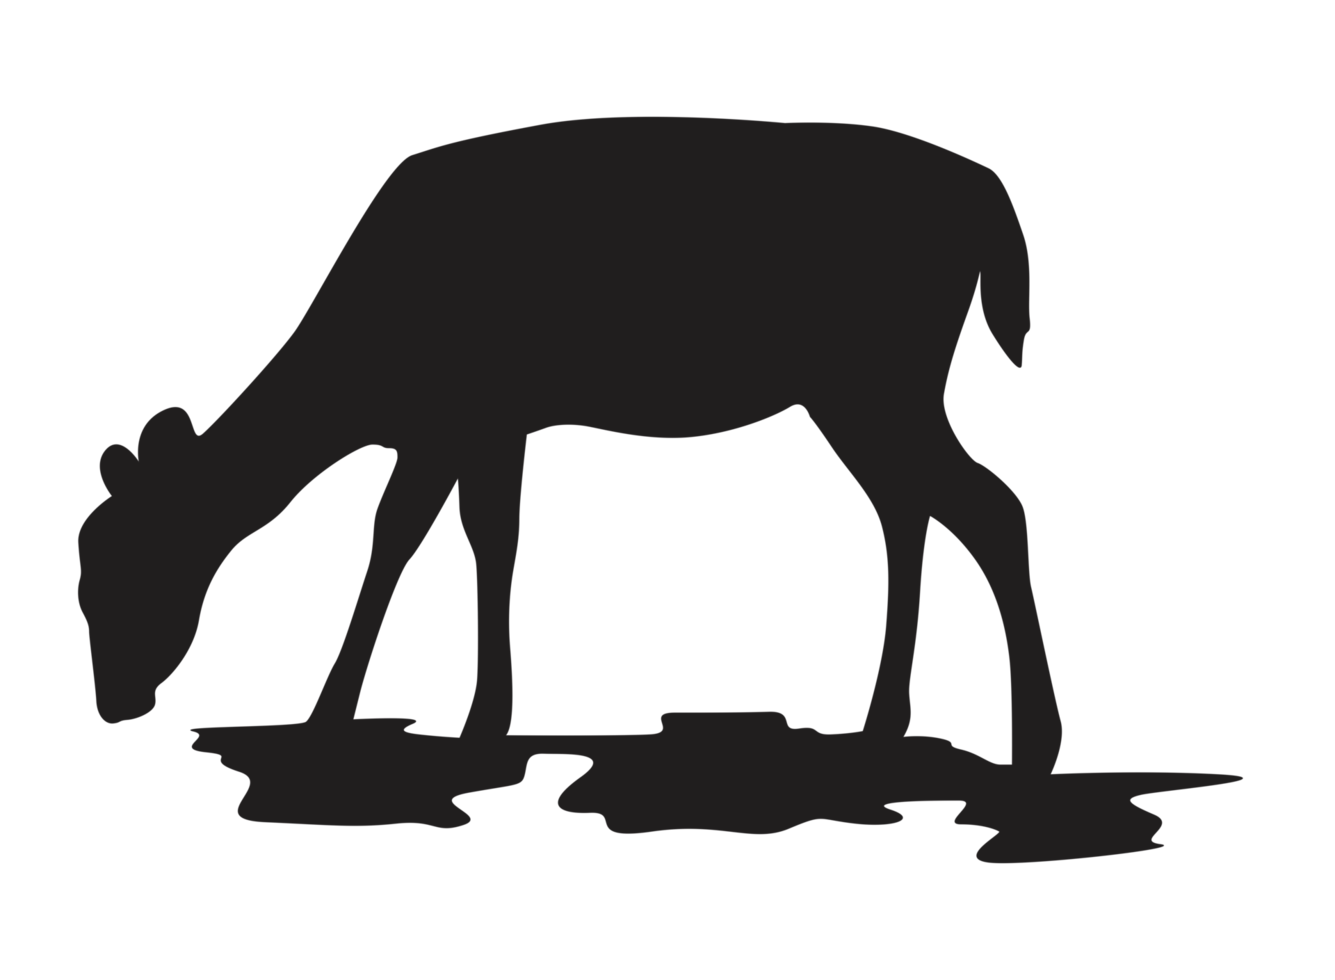 animale - cervo silhouette png